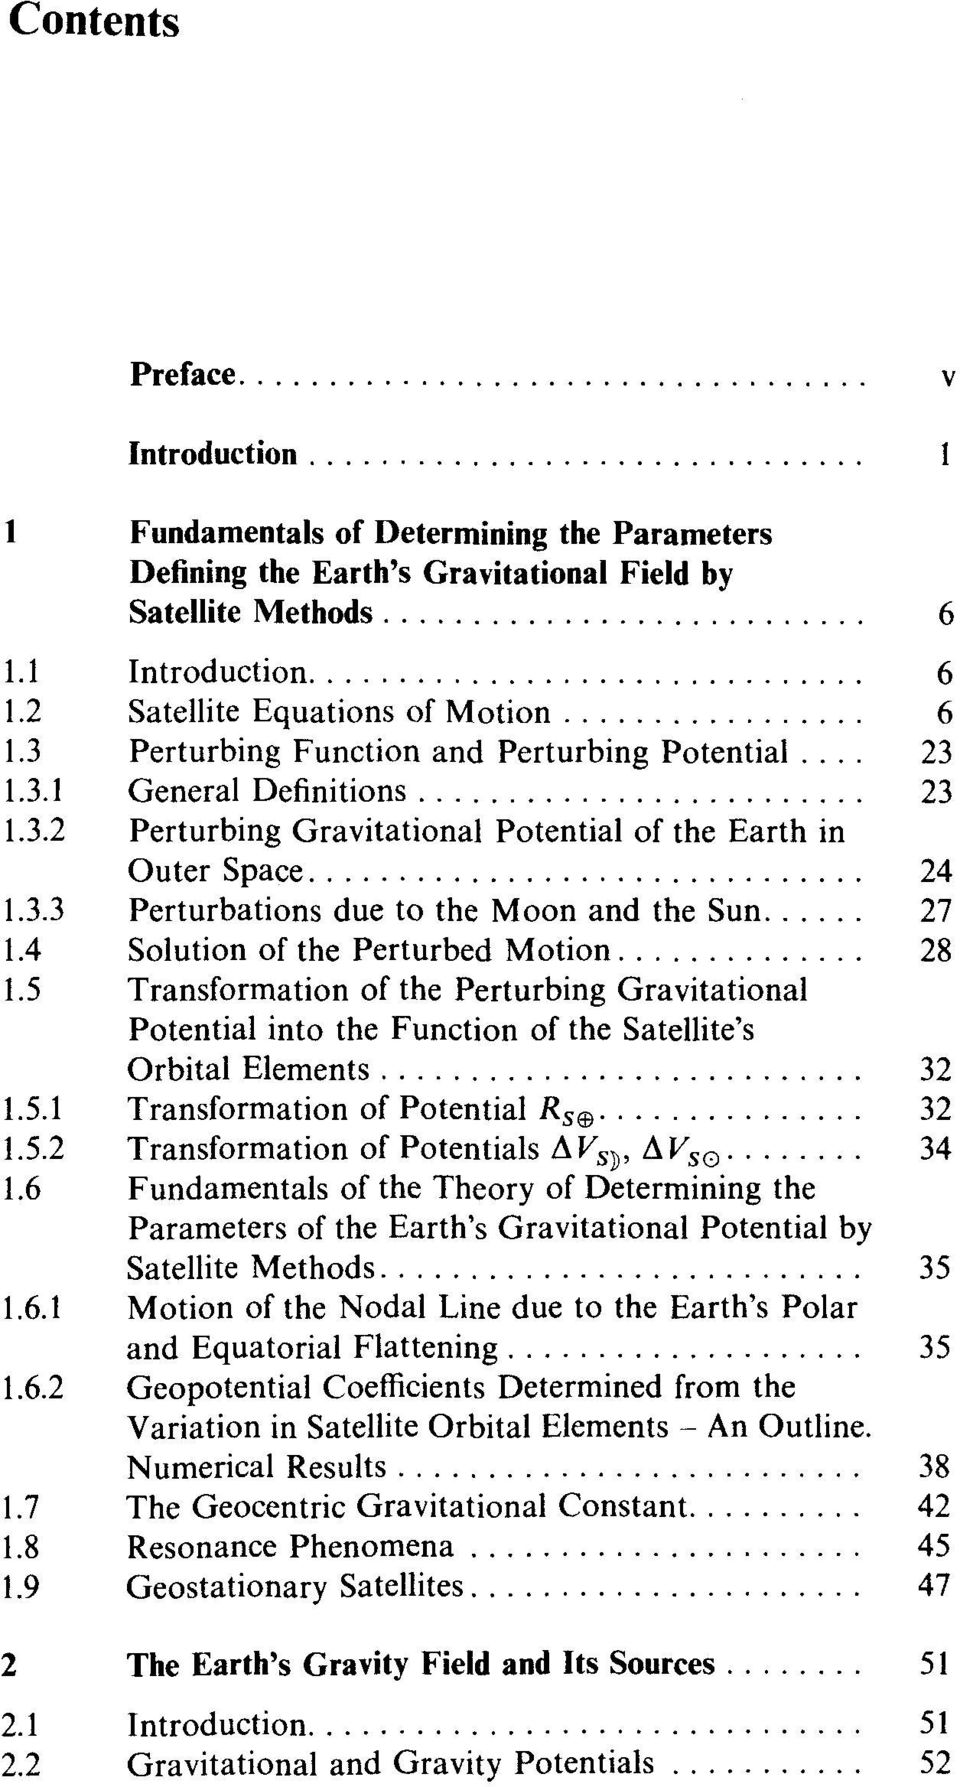 4 Solution of the Perturbed Motion 28 1.5 Transformation of the Perturbing Gravitational Potential into the Function of the Satellite's Orbital Elements 32 1.5.1 Transformation of Potential R s@ 32 1.